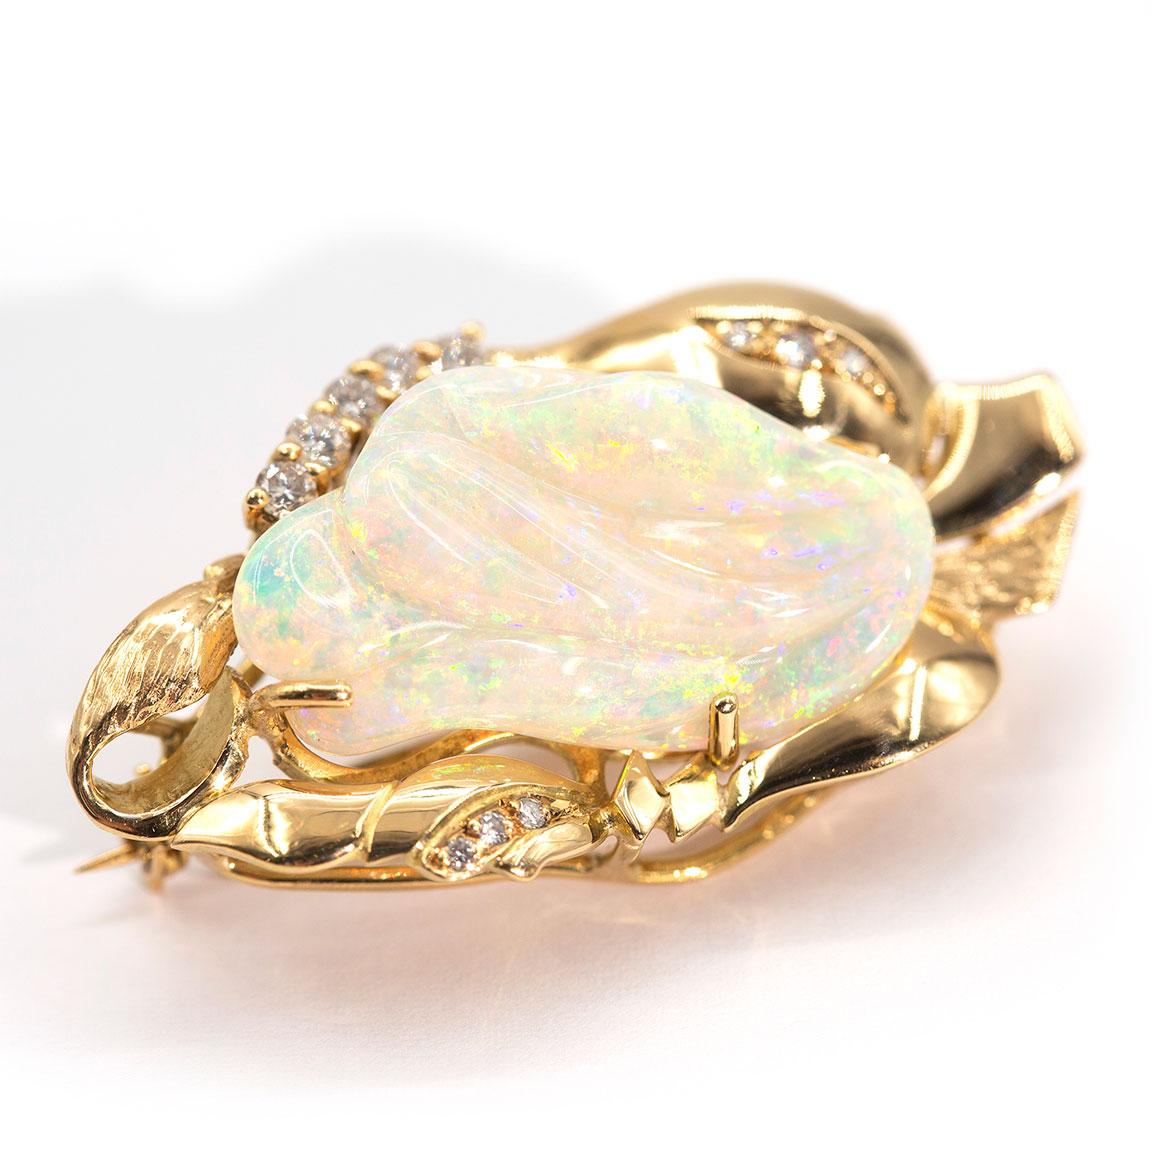 Lovingly crafted in 18 carat yellow gold is this enchanting vintage pendant with an alluring 9.6 carat solid carved Opal taking centre stage, and carefully set in a fine four claw setting.  She has an ornate free form border beset with sparkling